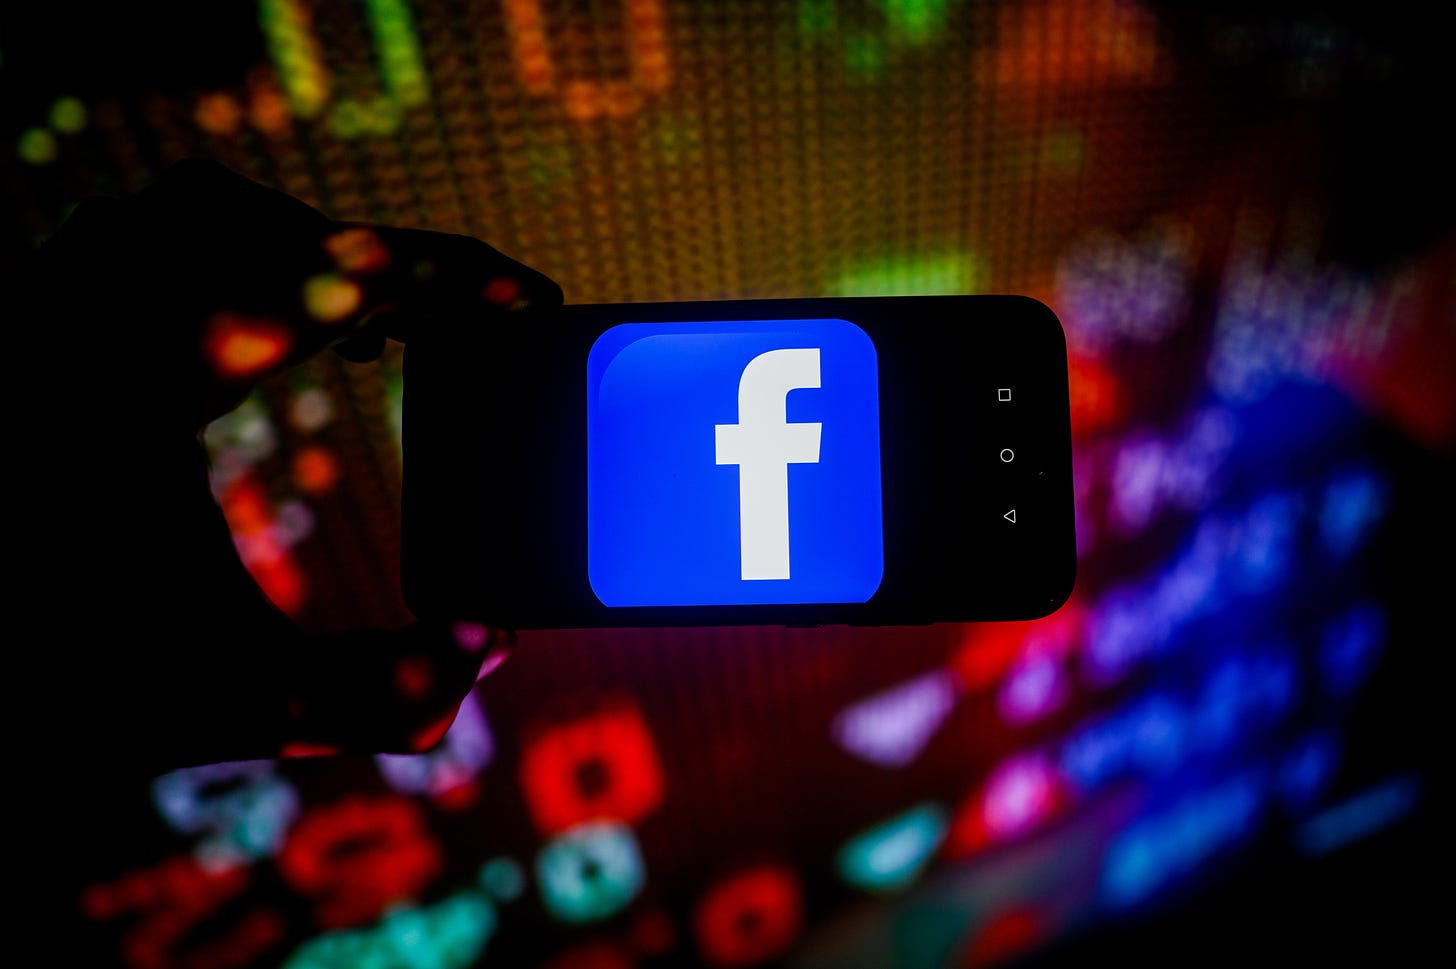  In this photo illustration, a Facebook logo is displayed on a smartphone with stock market percentages in the background. (Photo Illustration by Omar Marques/SOPA Images/LightRocket via Getty Images)